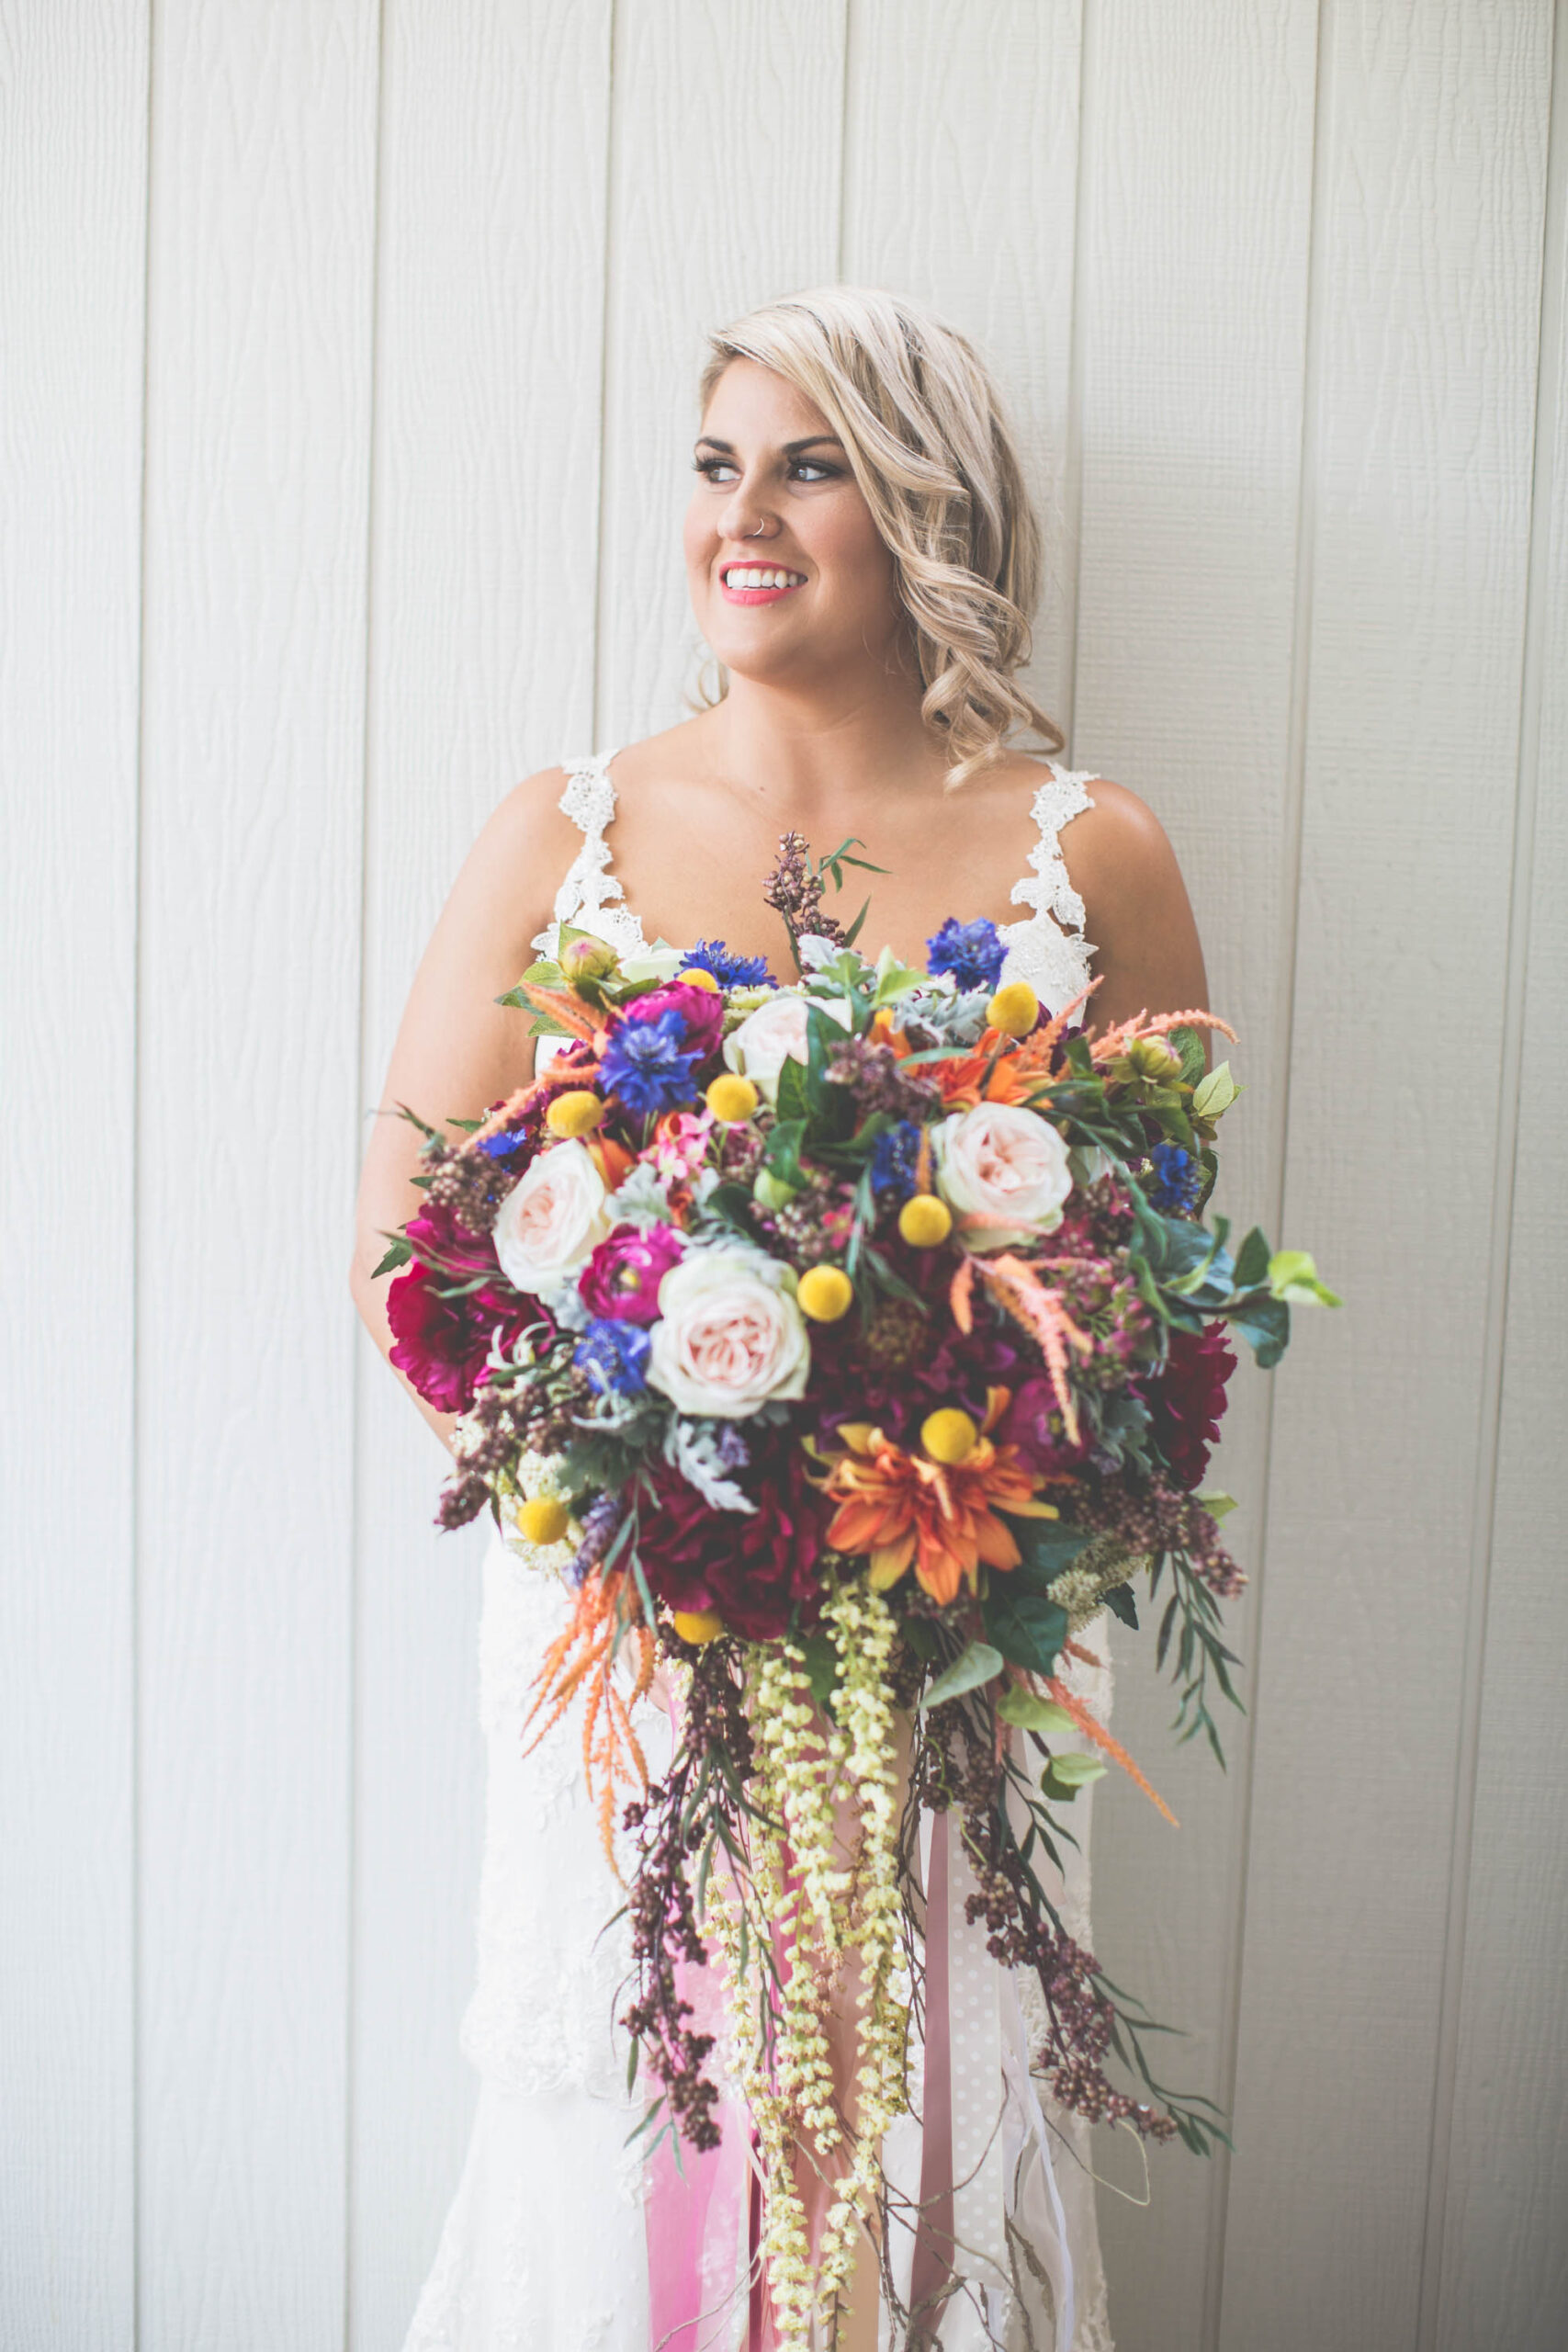 Wedding of the Year: Megan and Dylan win September | Easy Weddings